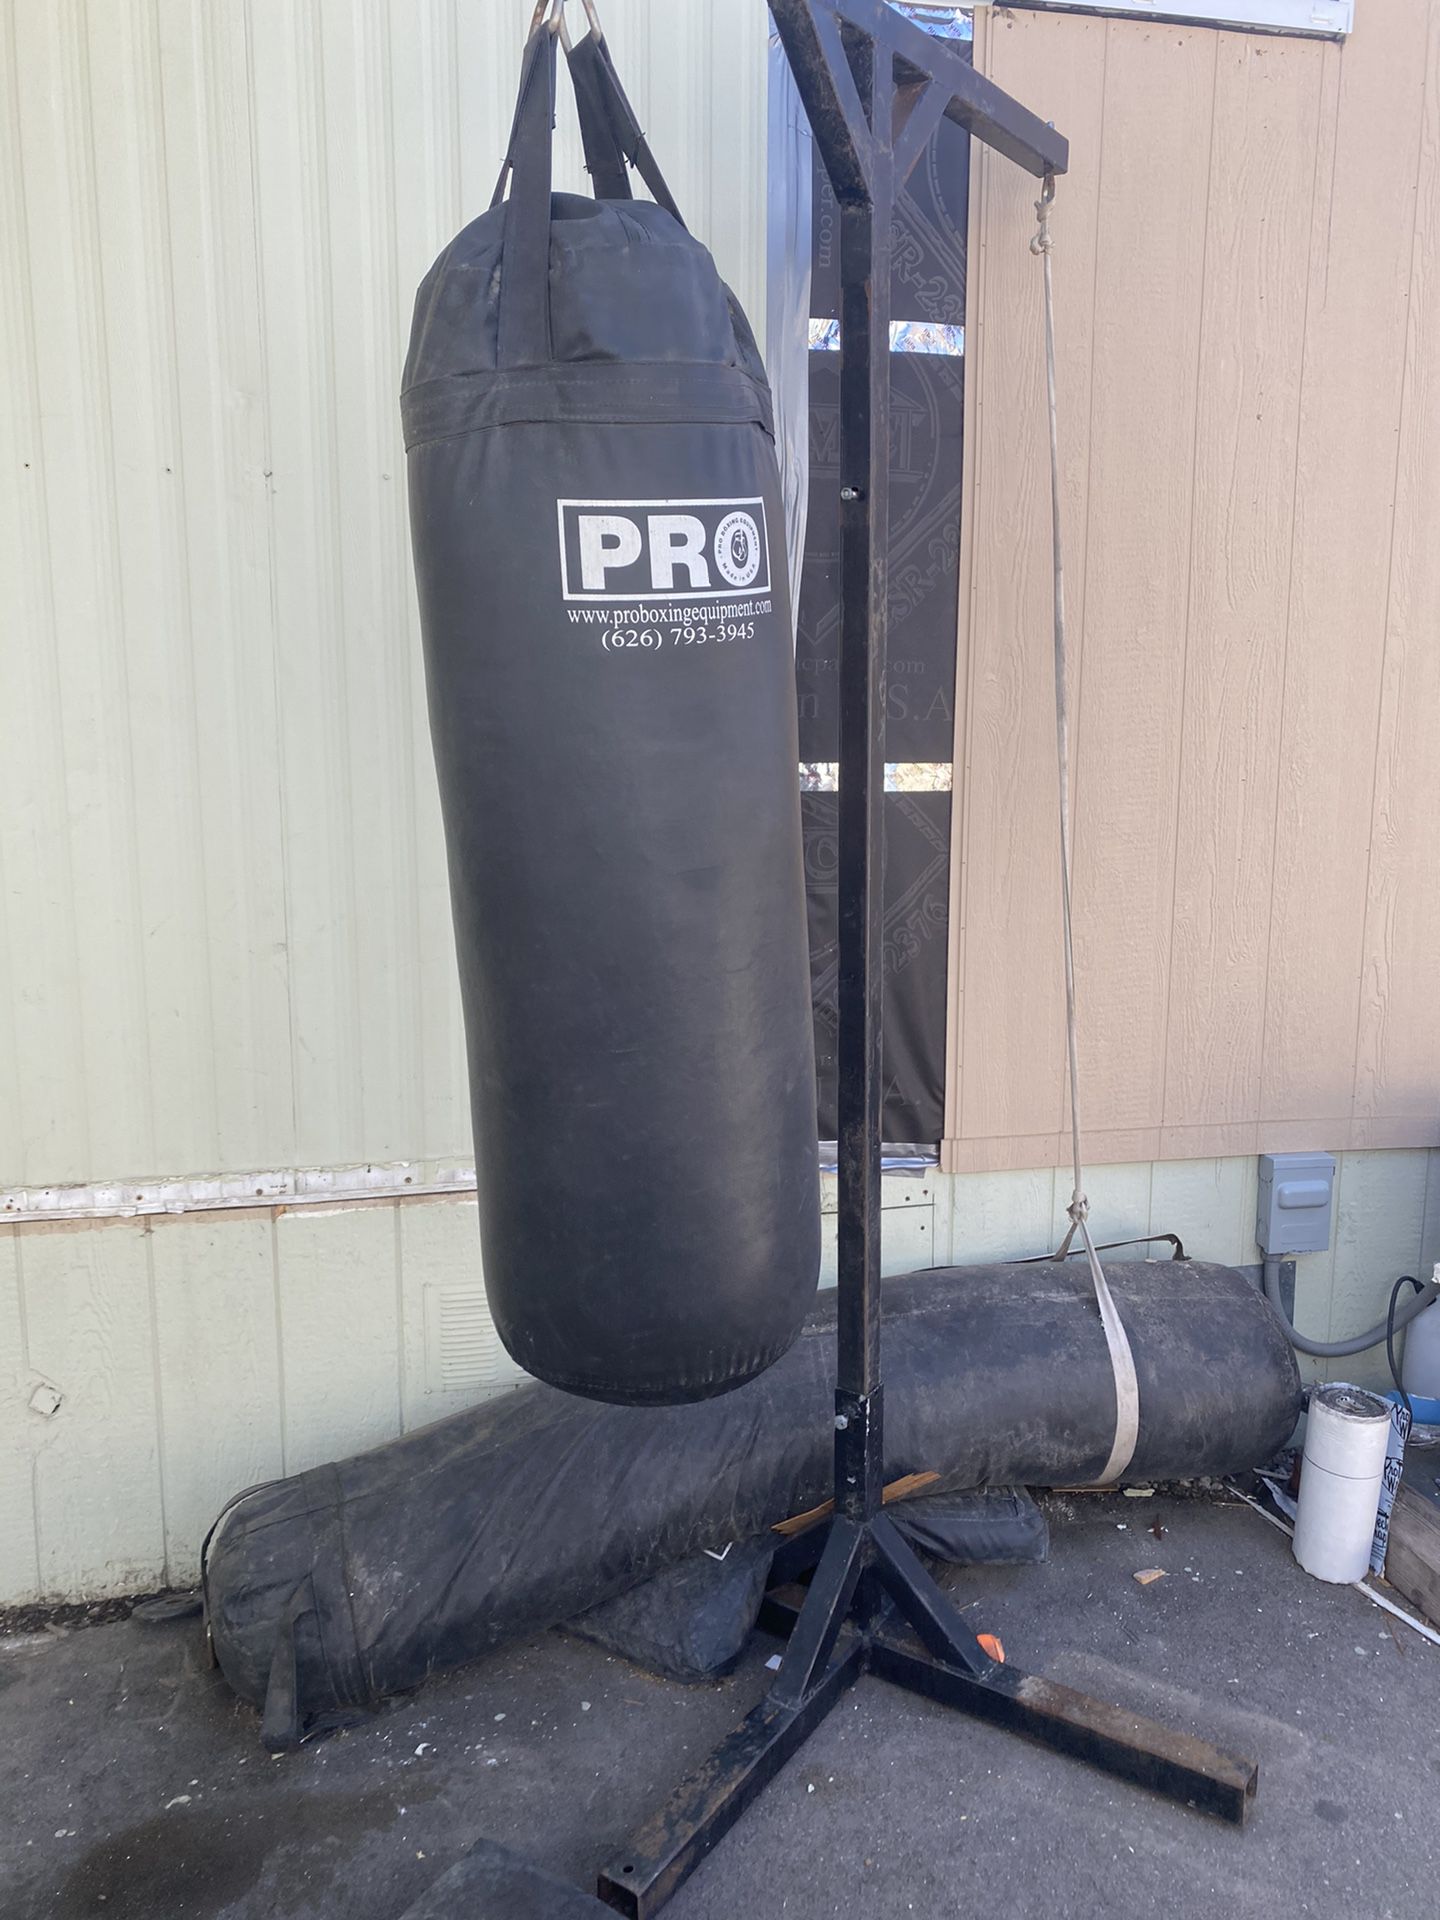 Pro Boxing Equipment, Both Bags And The Speed Ball